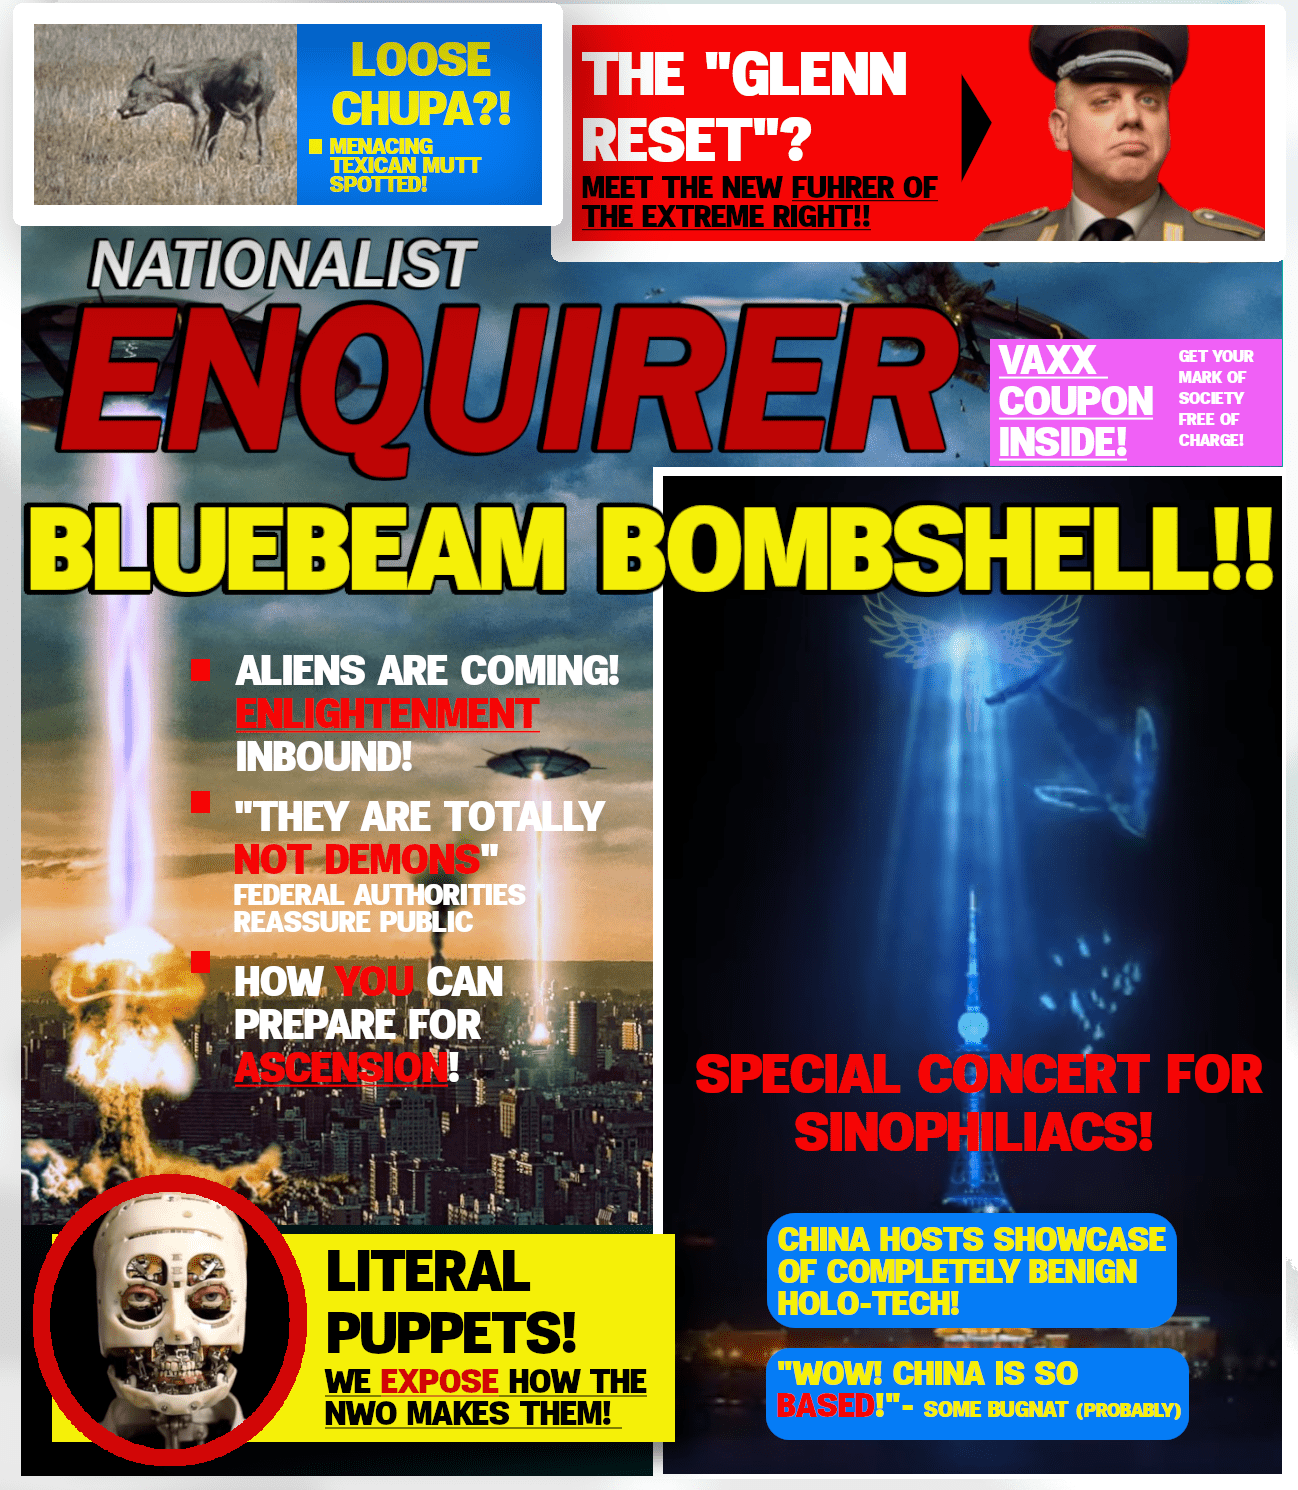 The Nationalist Enquirer: The Junior Kennedy Detective League: S7:EP04